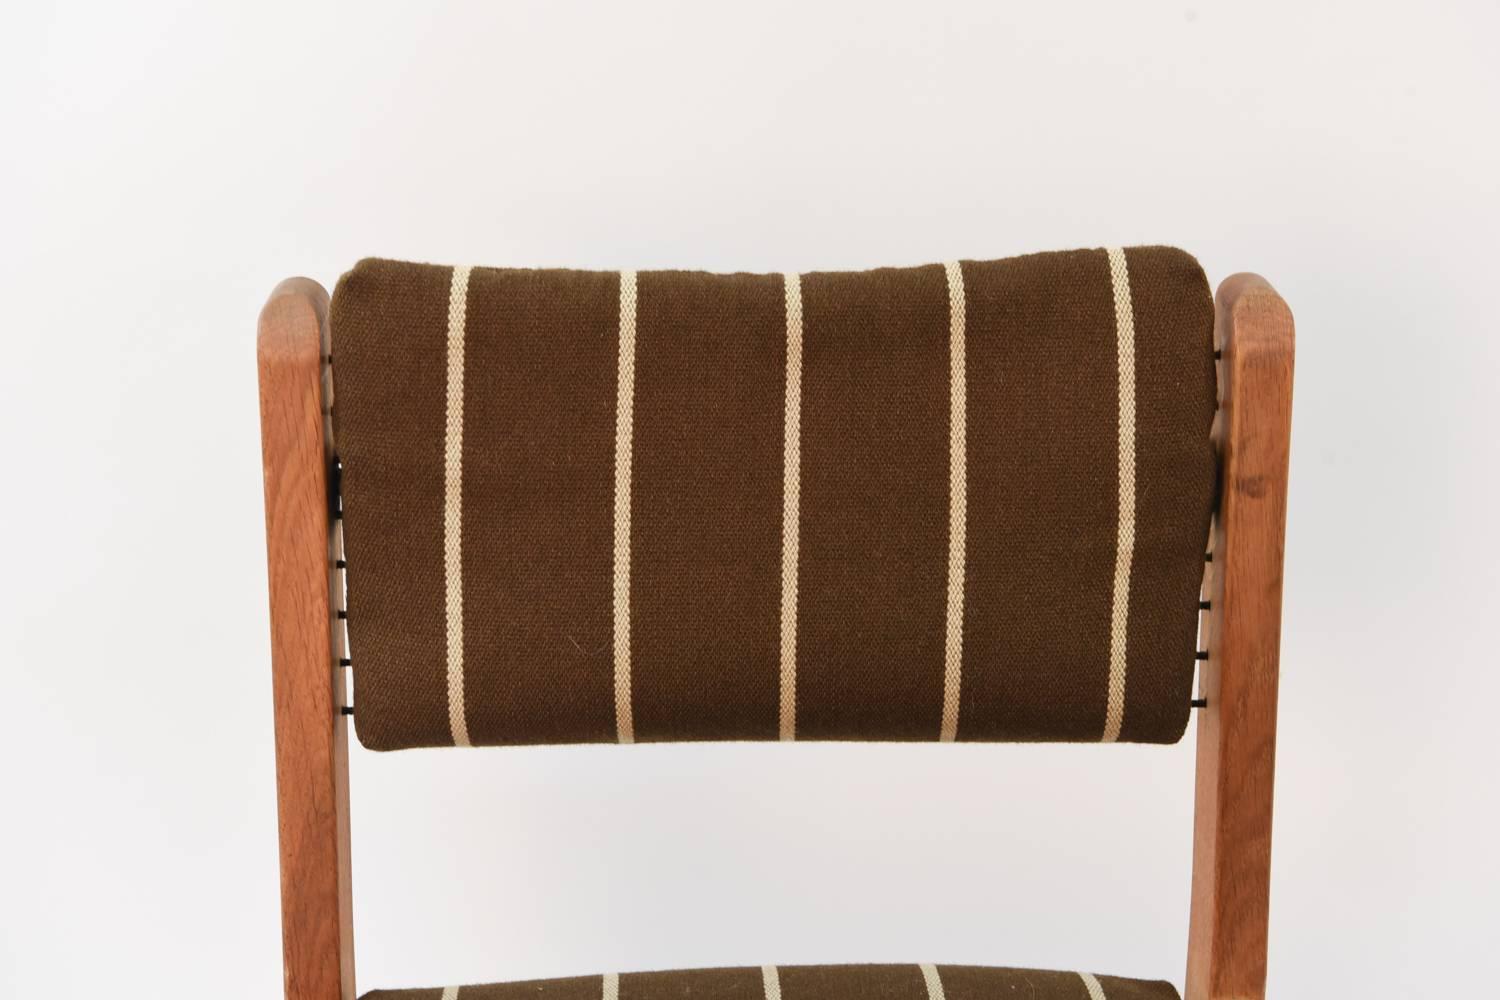 A set of six Danish midcentury side chairs featuring oak frames with flagline cording to support the back and seat cushions. A great set with interesting form.